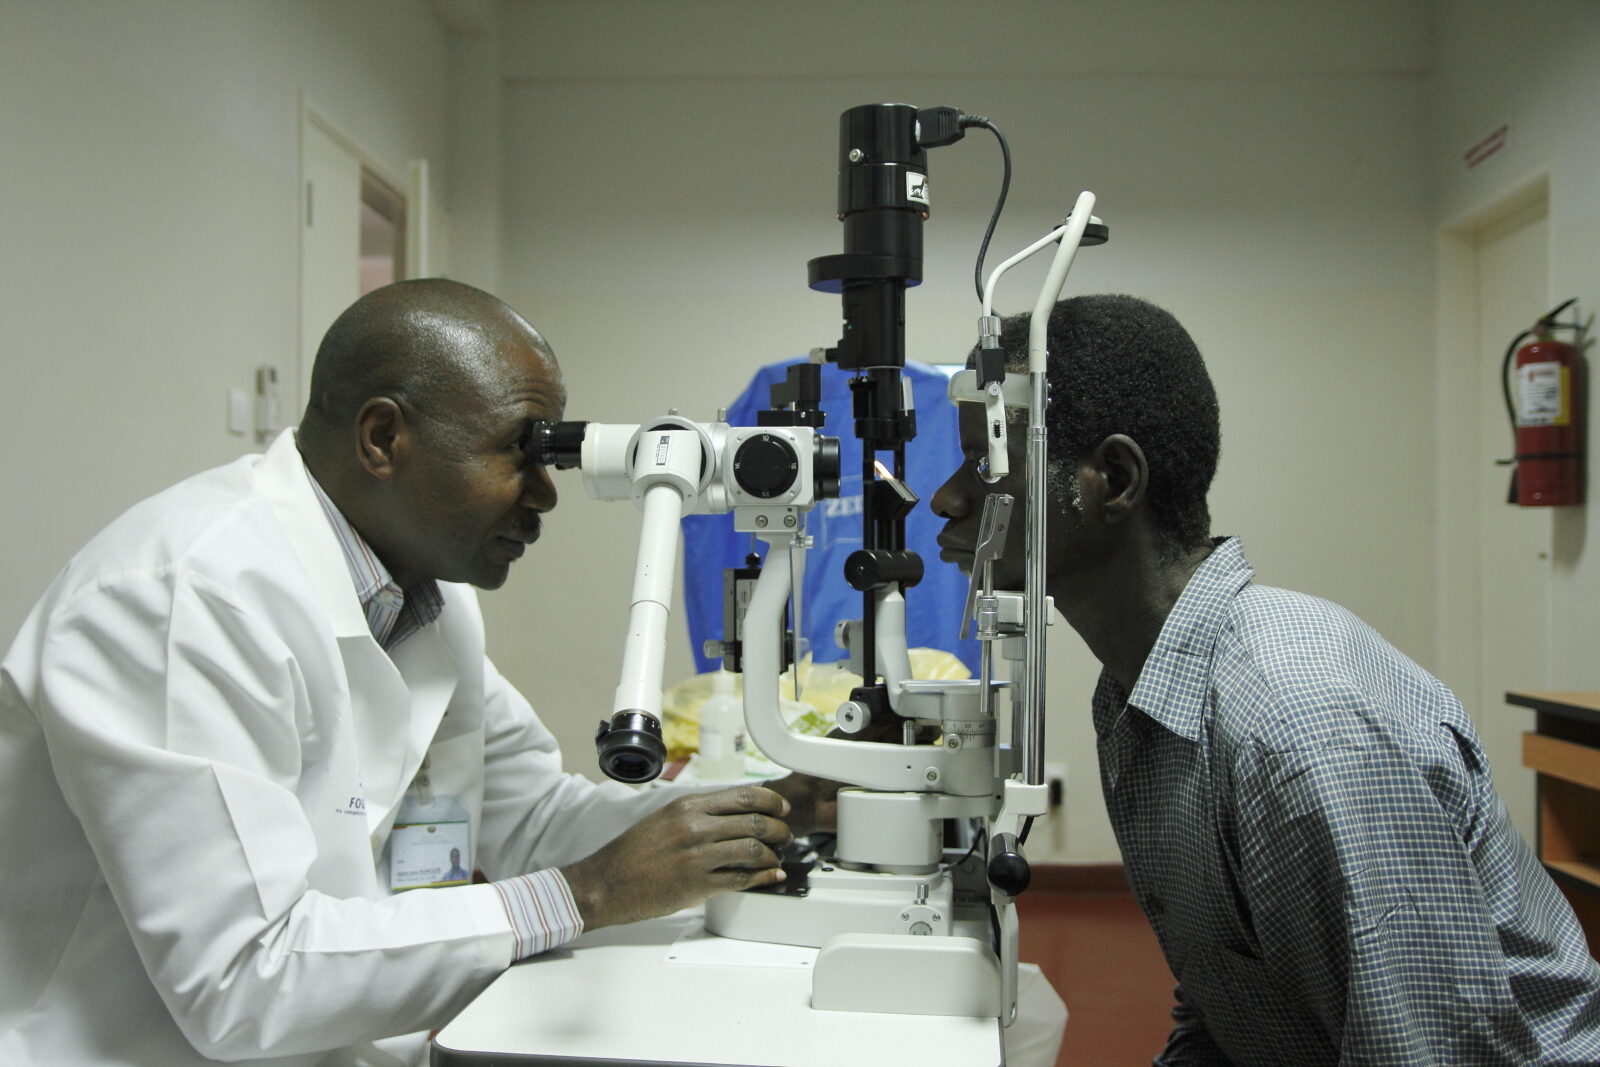 A doctor uses a large piece of equipment to test the vision of a man, within a clinic. The man is sitting on a chair, leaning forward and looking into the piece of eye-testing equipment.